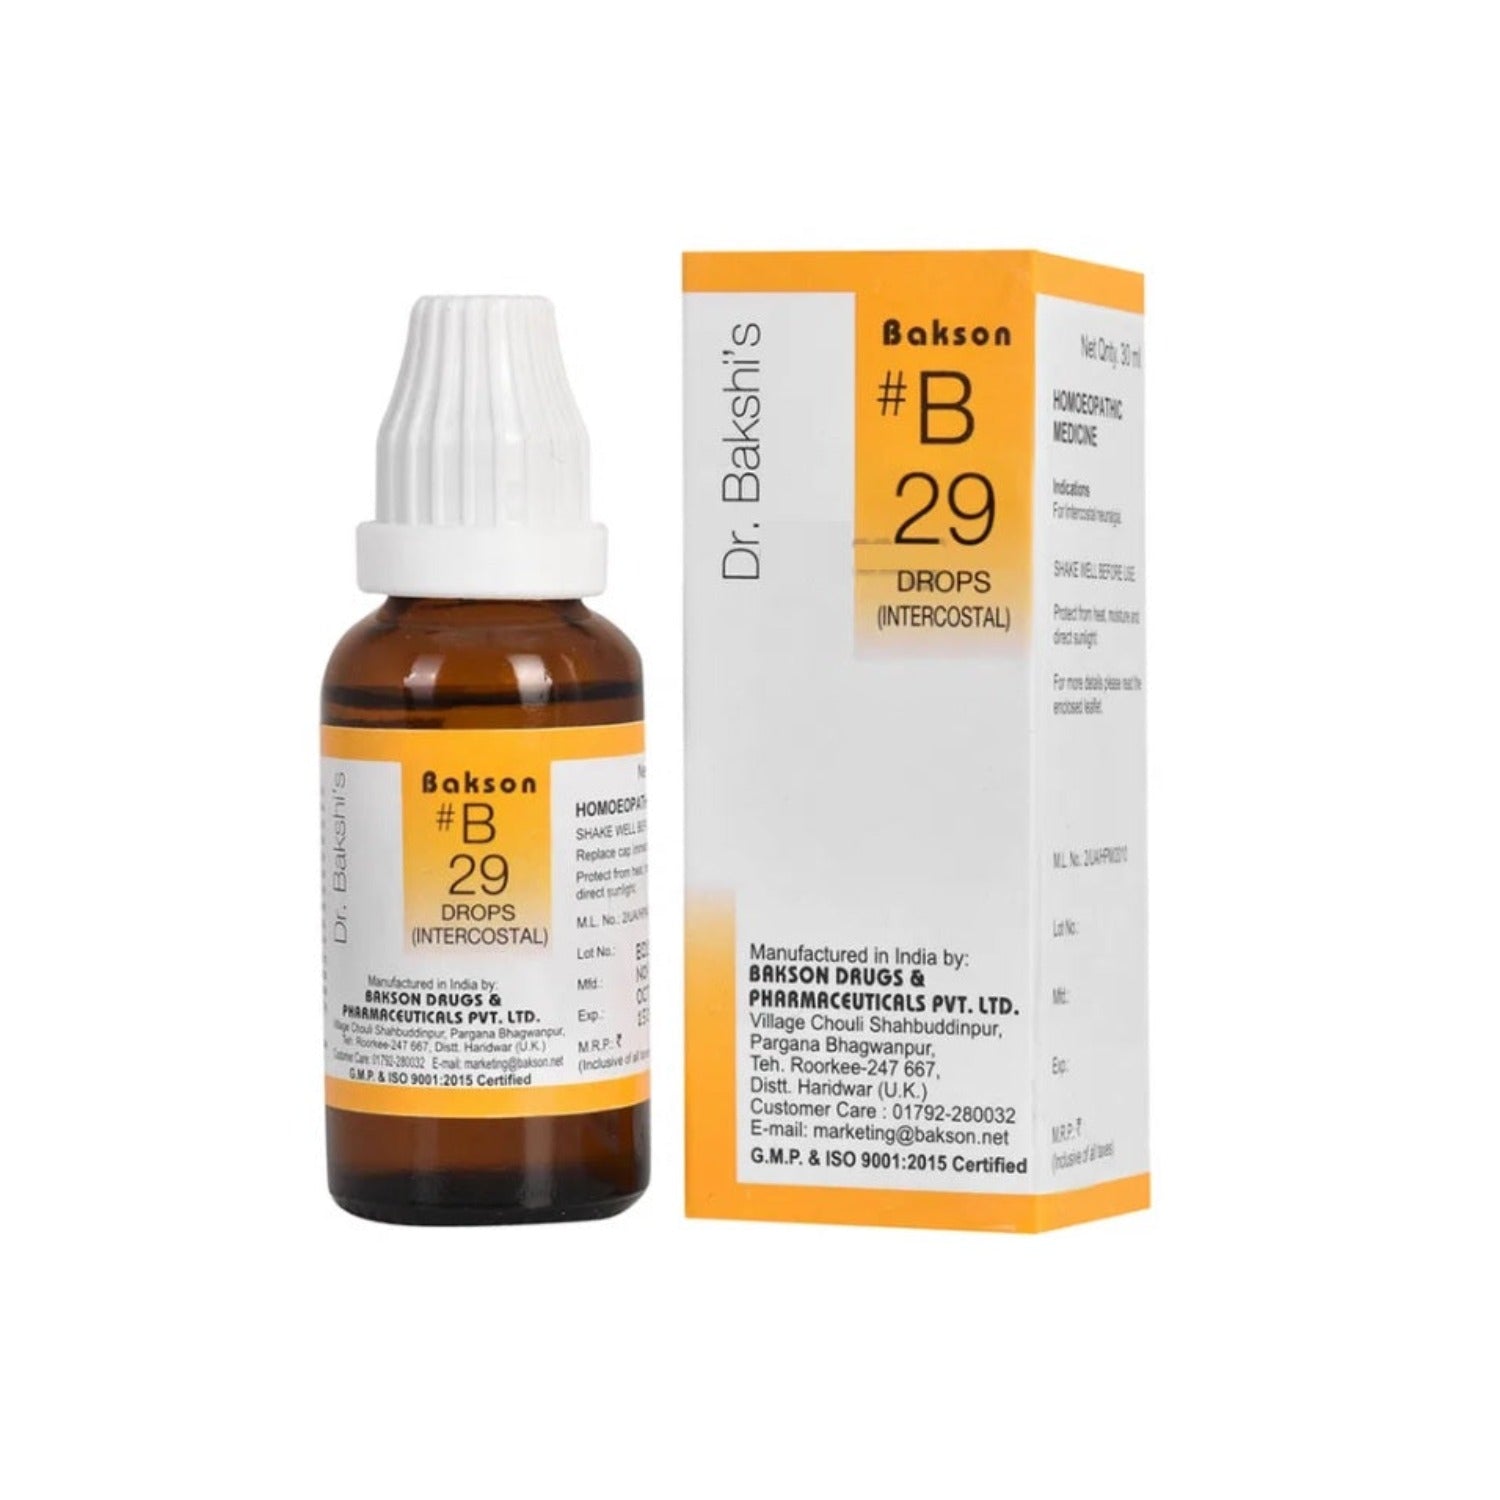 Bakson's Homoeopathy B29 (B-29) Intercostal For Pain In Intercostal Spaces Drops 30ml